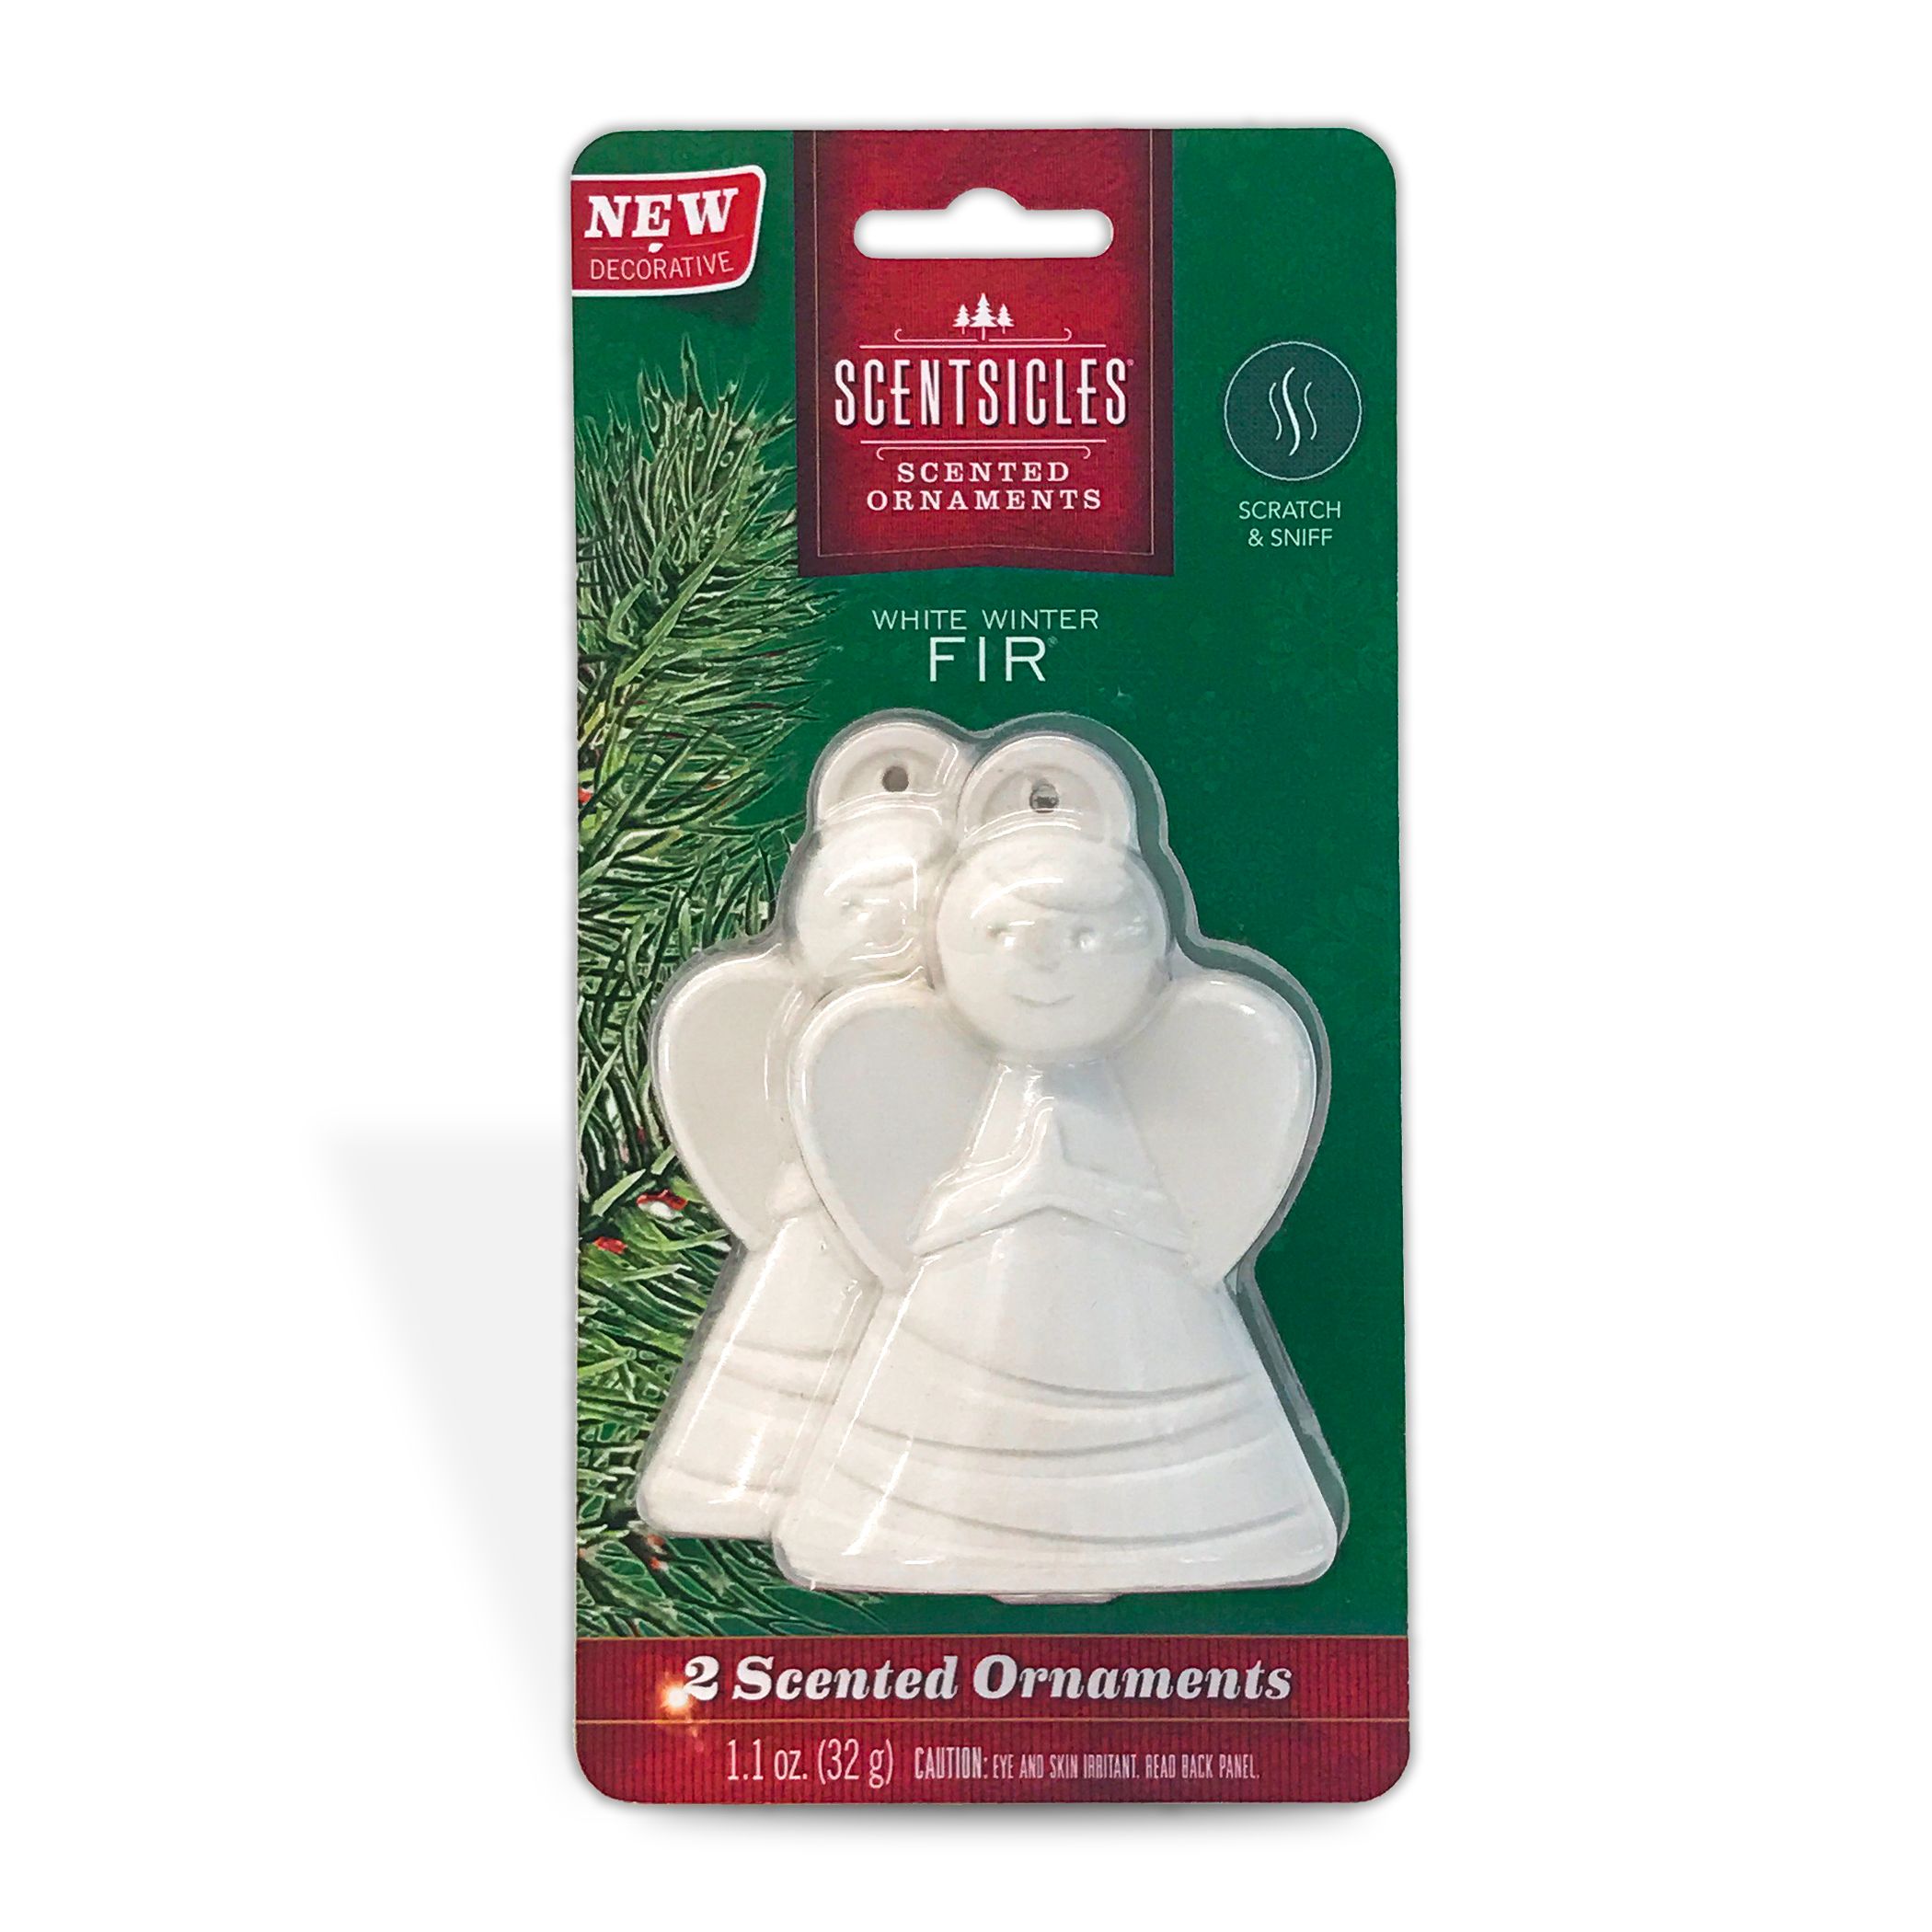 Smells Like Christmas 2 Pk Scentsicles Angel Scented Ornaments,White Winter Fir 